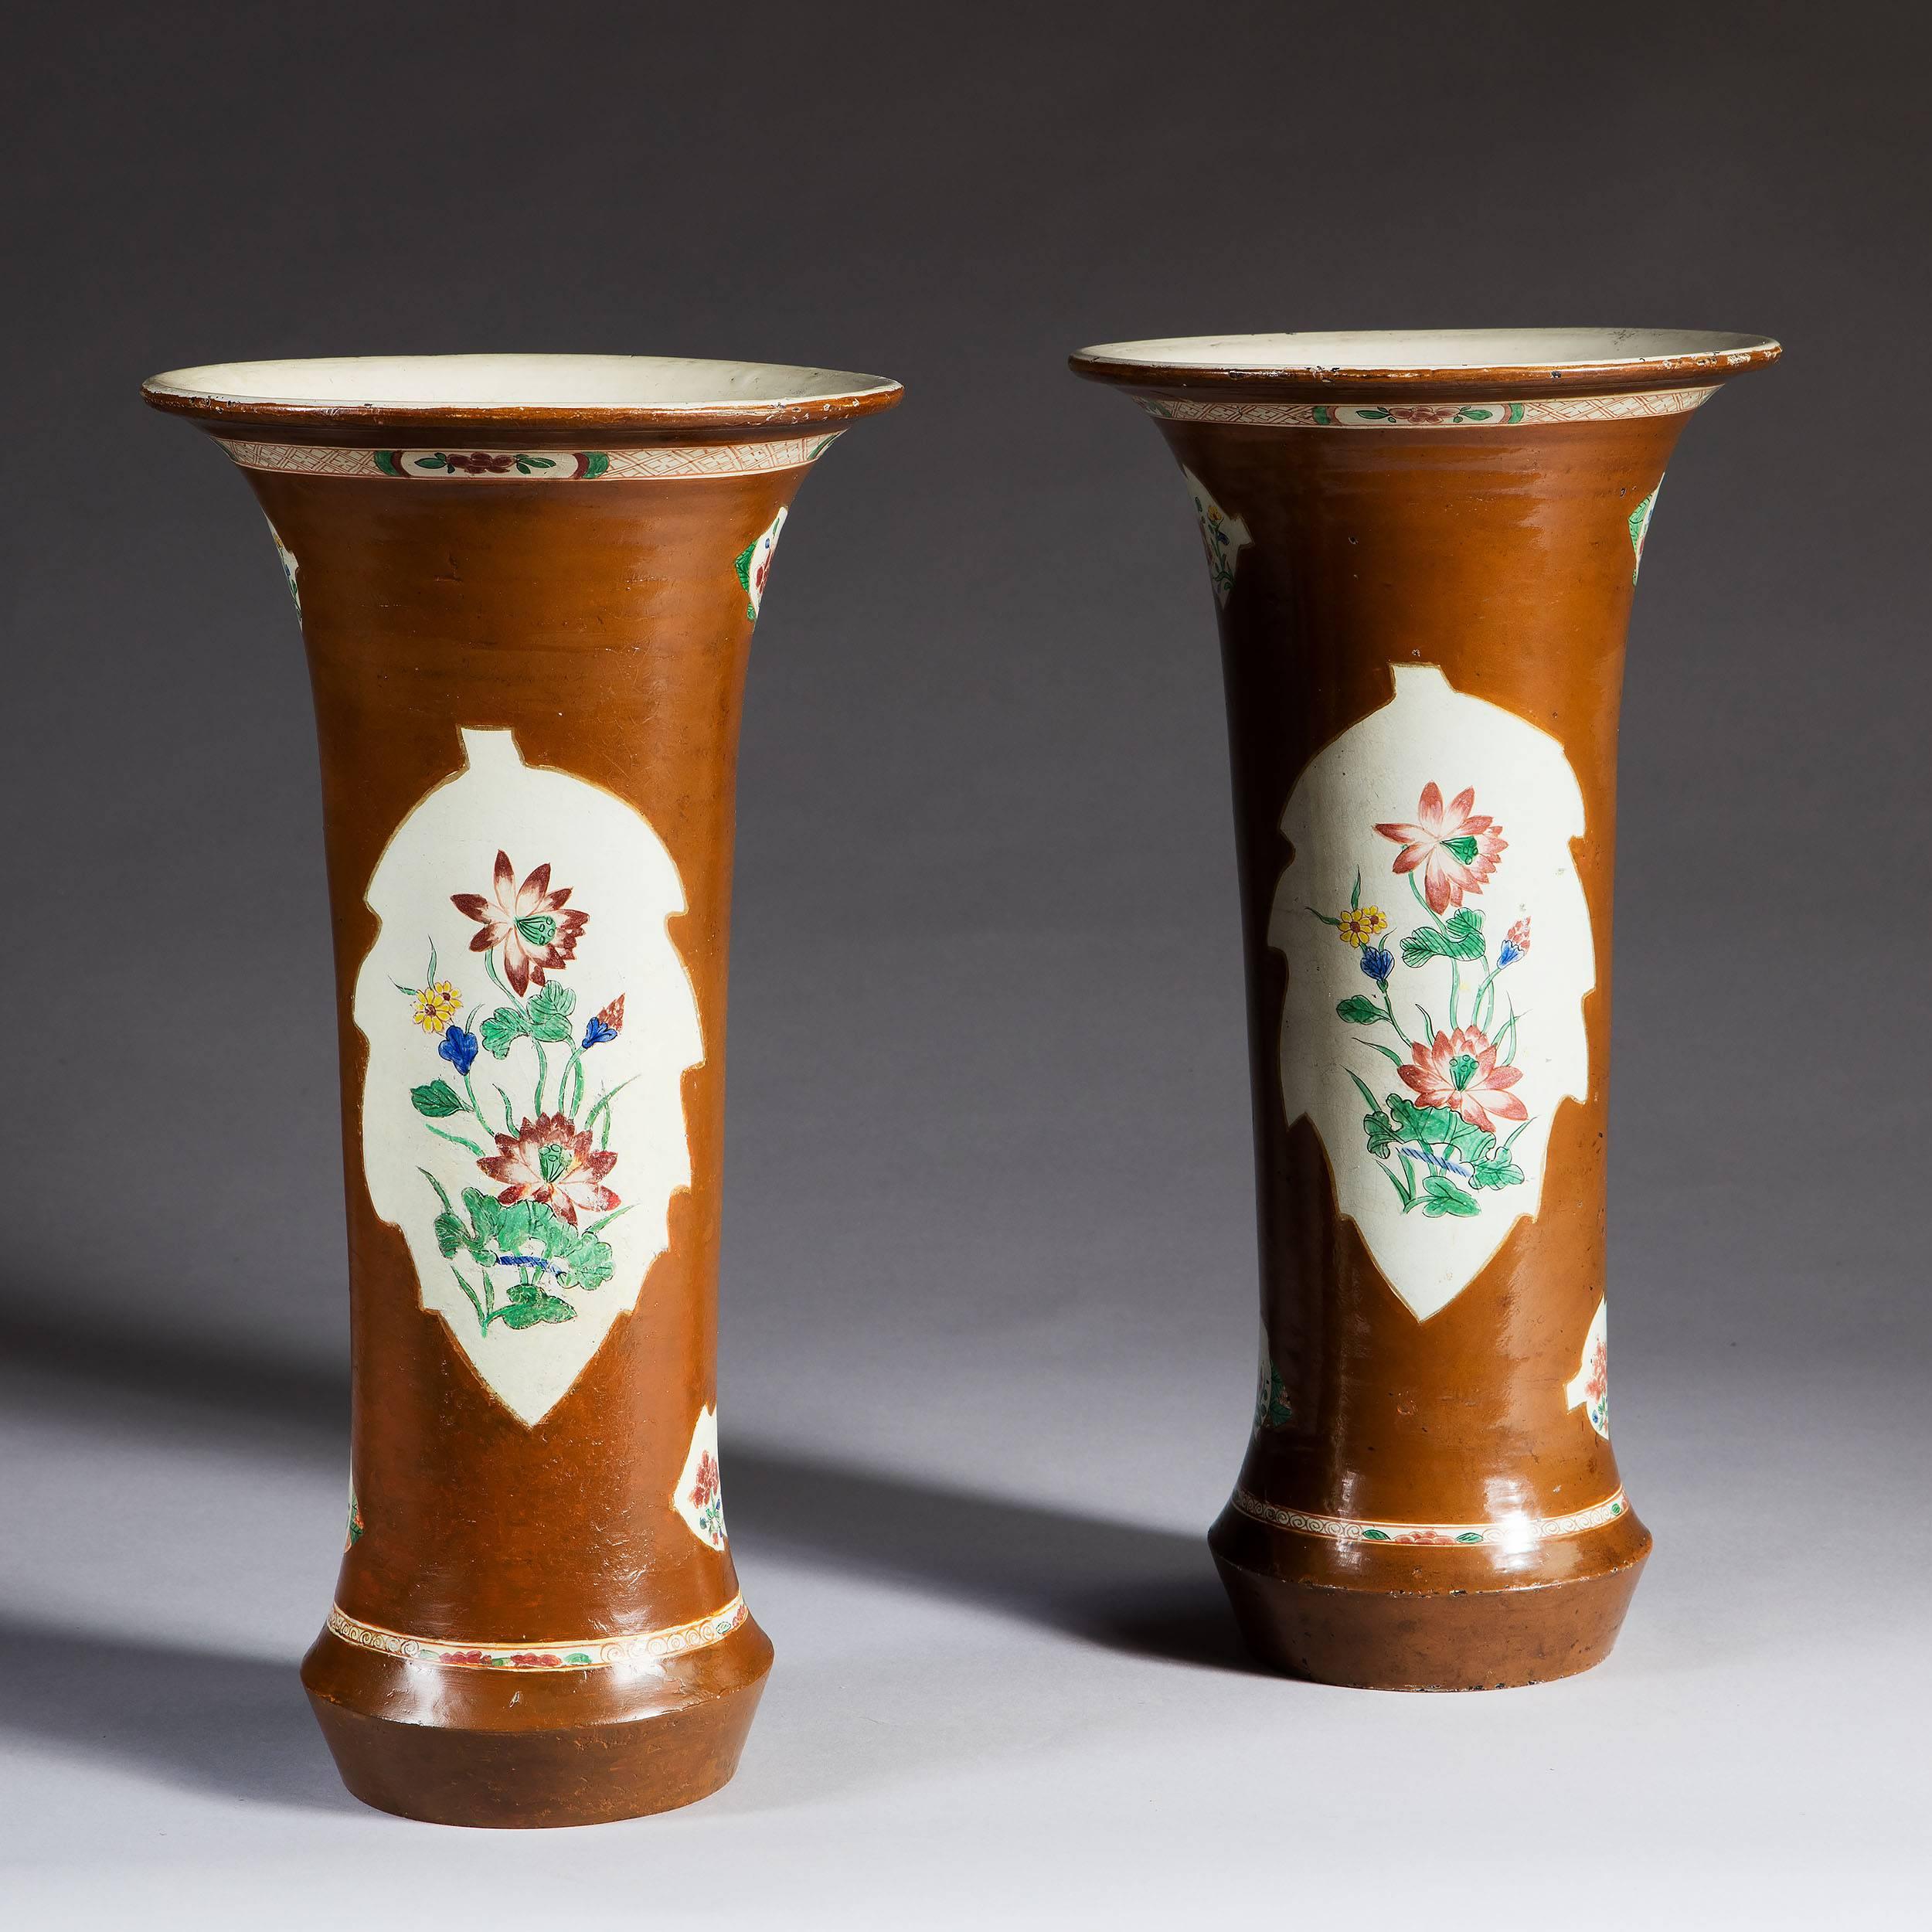 Probably Berlin, early 18th century.

A very unusual and rare pair of early 18th century Batavia style brown Japanned trumpet vases, probably Berlin pottery. The vases are japanned in the fashionable Batavia brown glaze palette with hand-painted